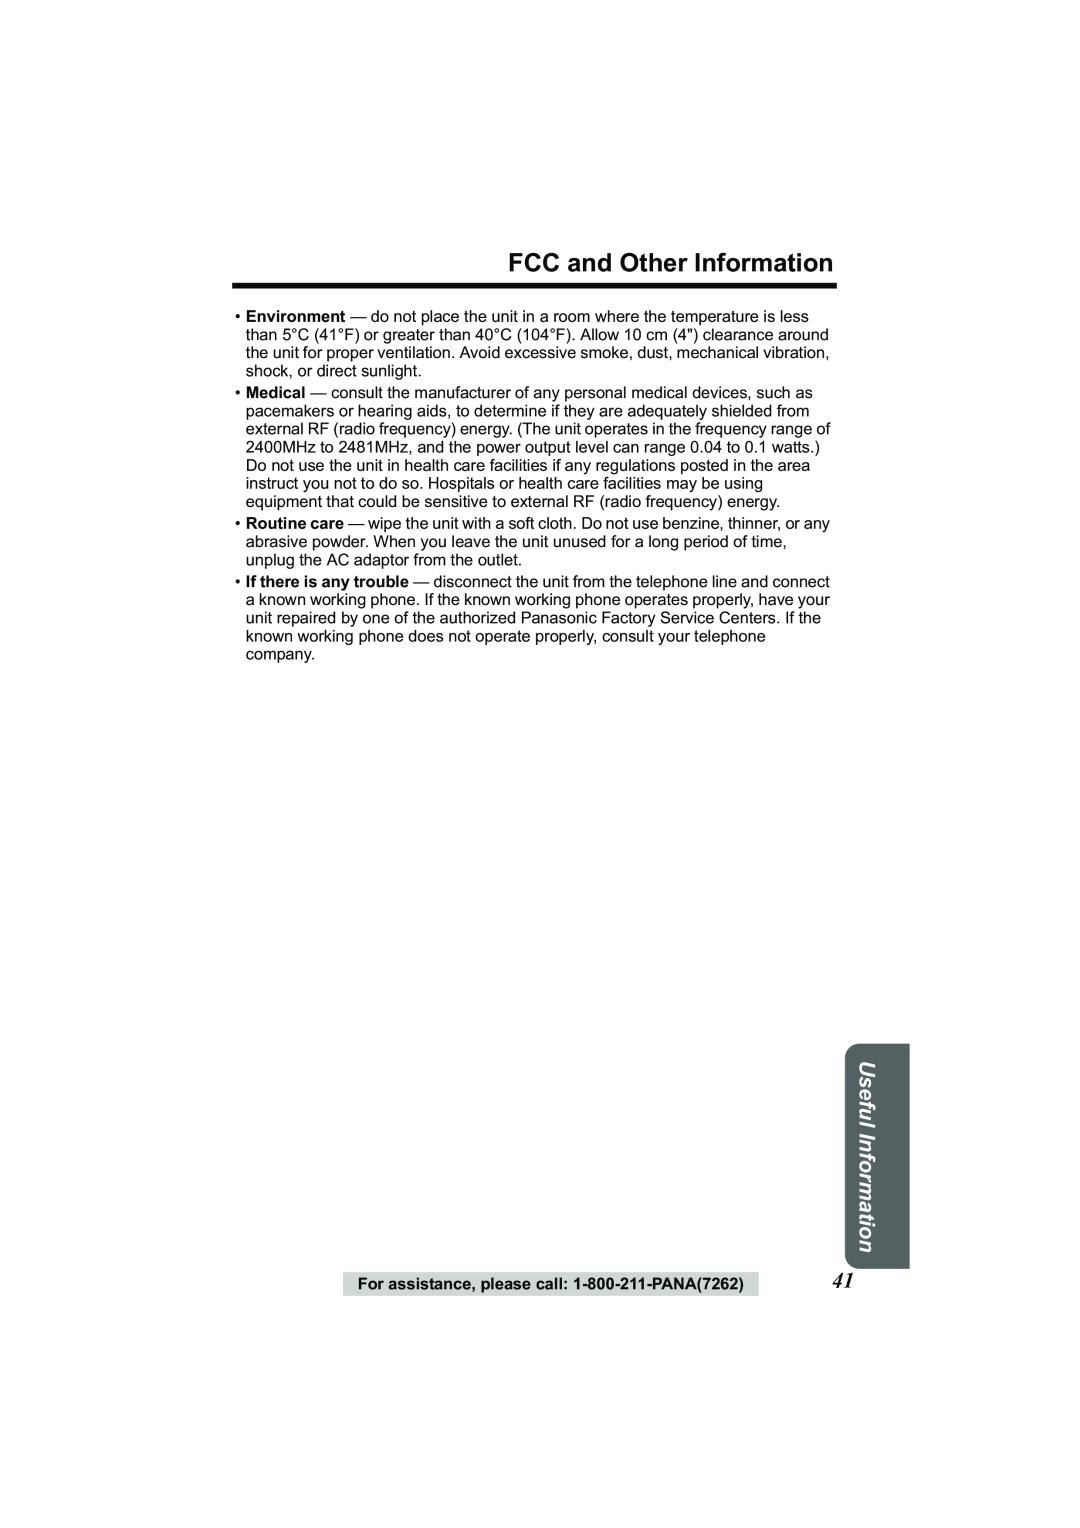 Panasonic Acr14CF.tmp manual FCC and Other Information, Useful Information 